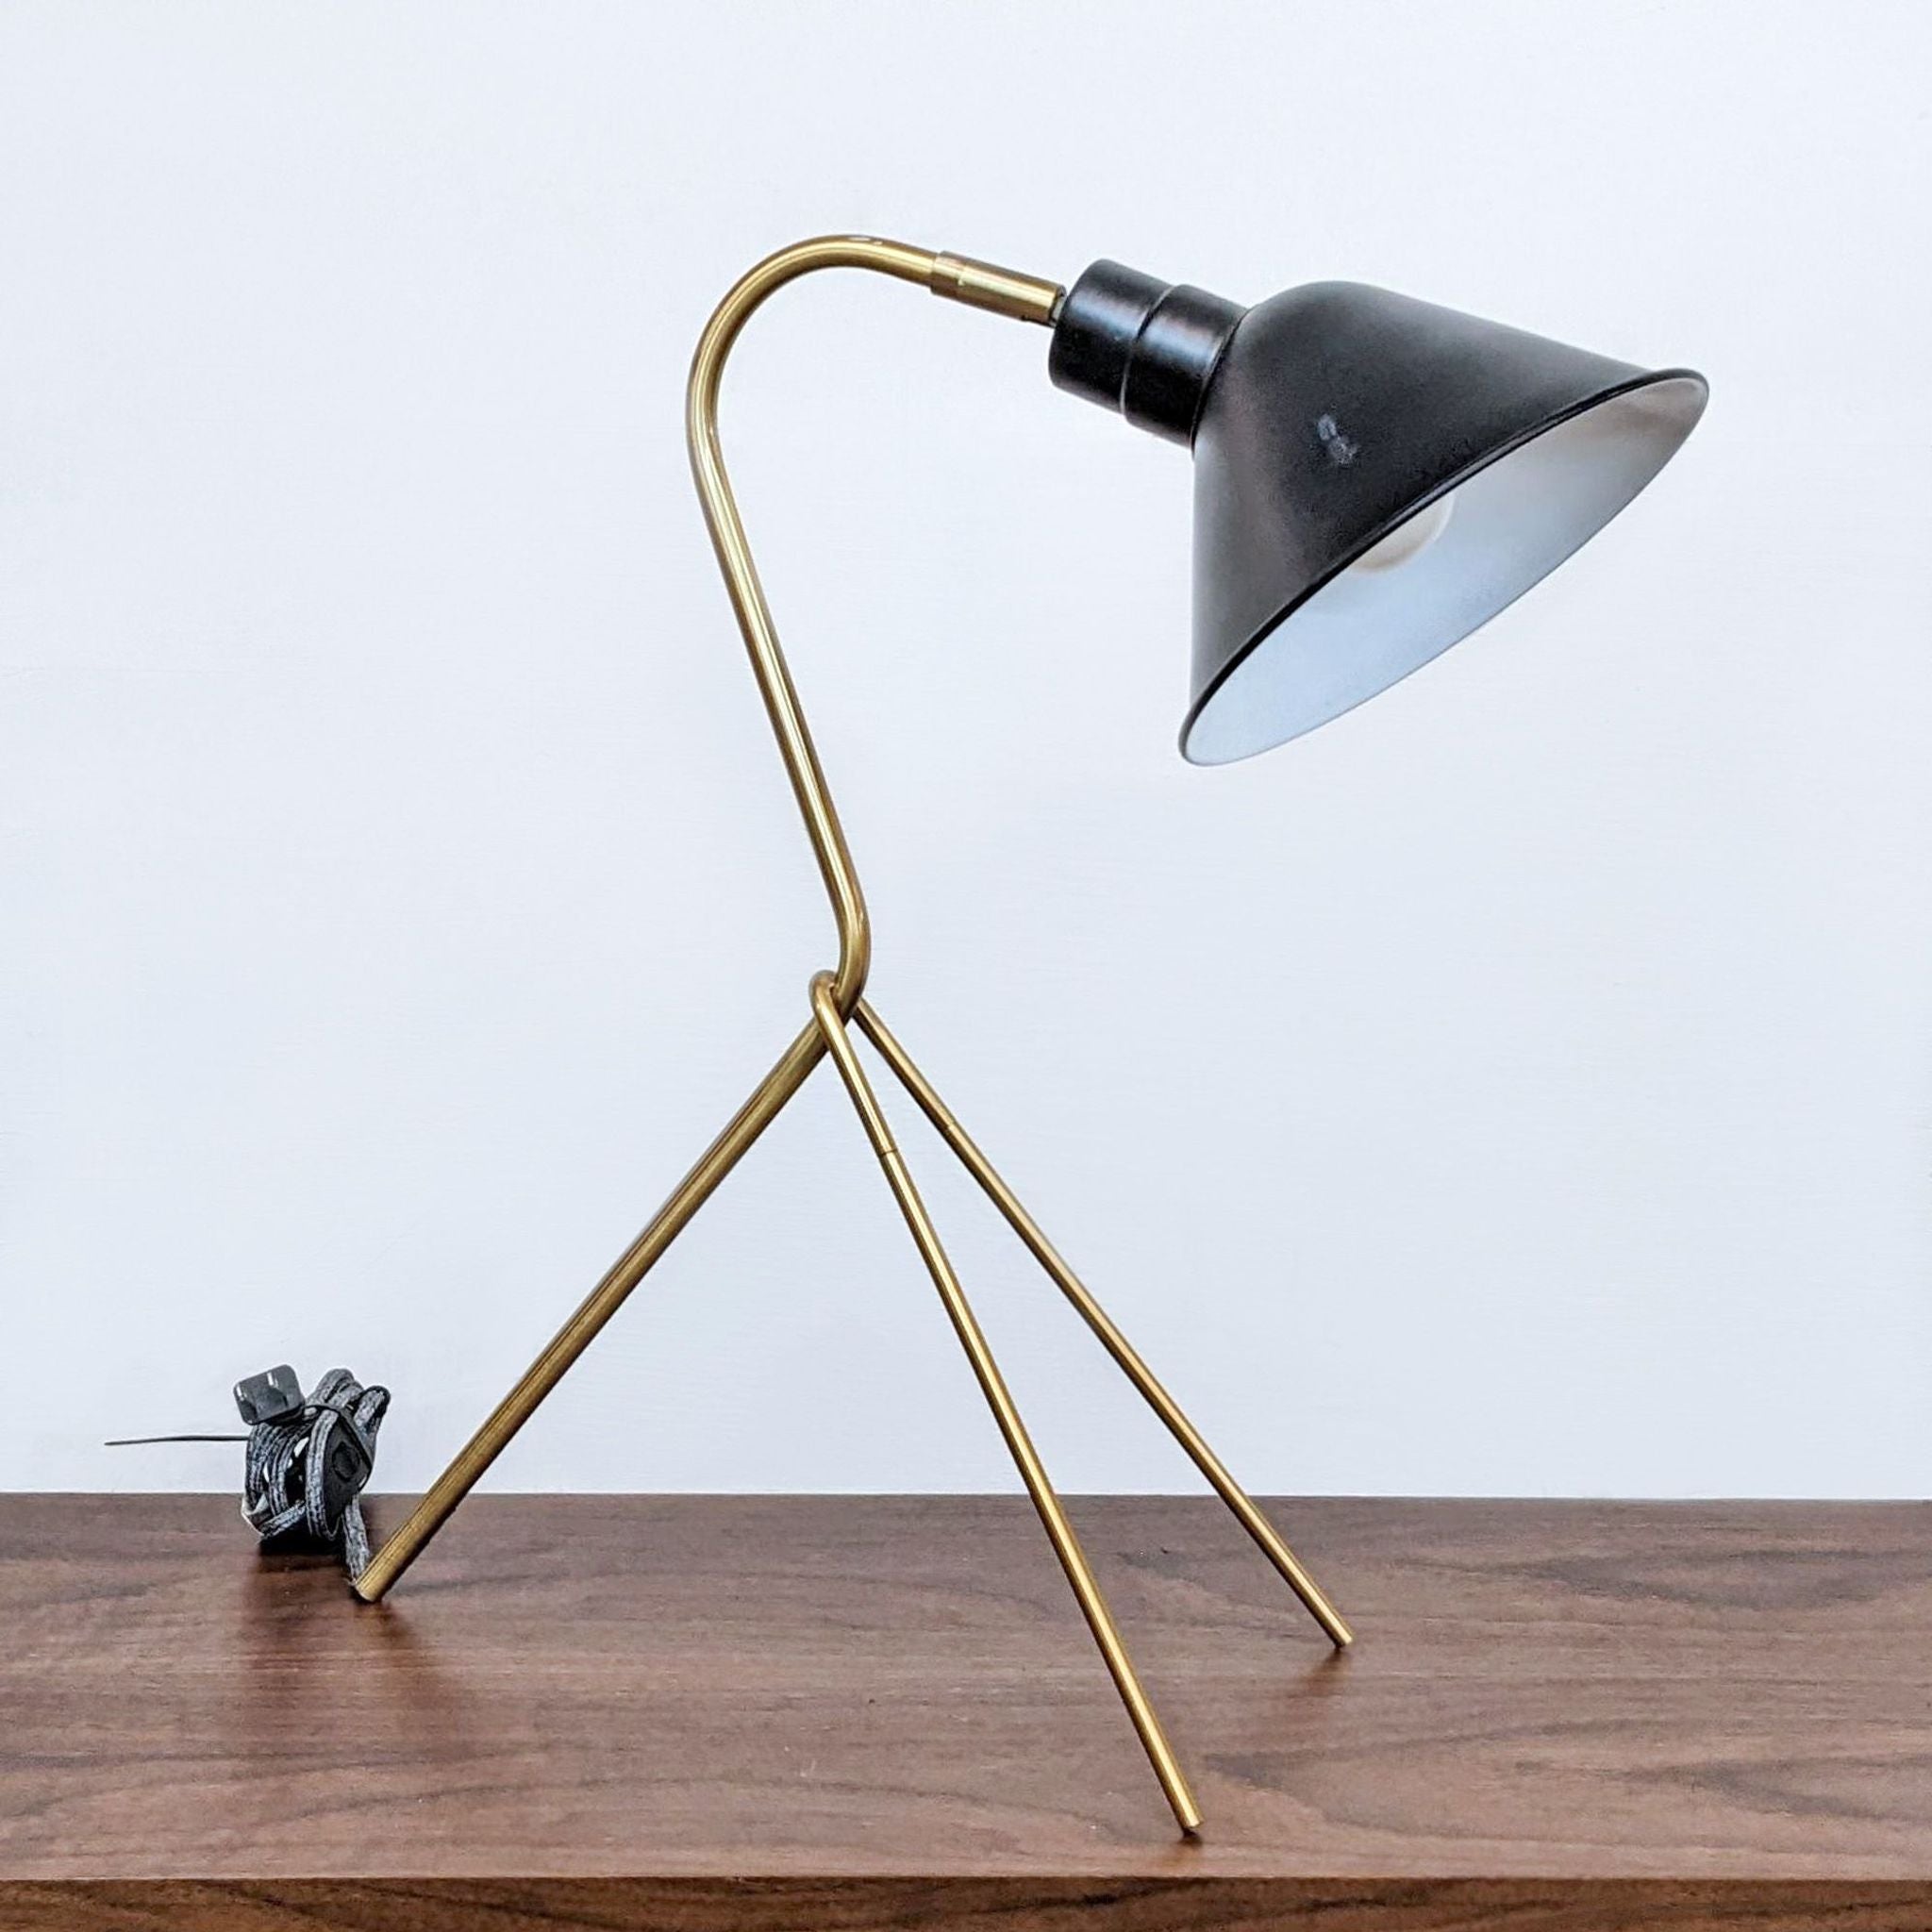 Modern Reperch lighting, featuring a metallic desk lamp with a distinctive tripod base and angled black shade.